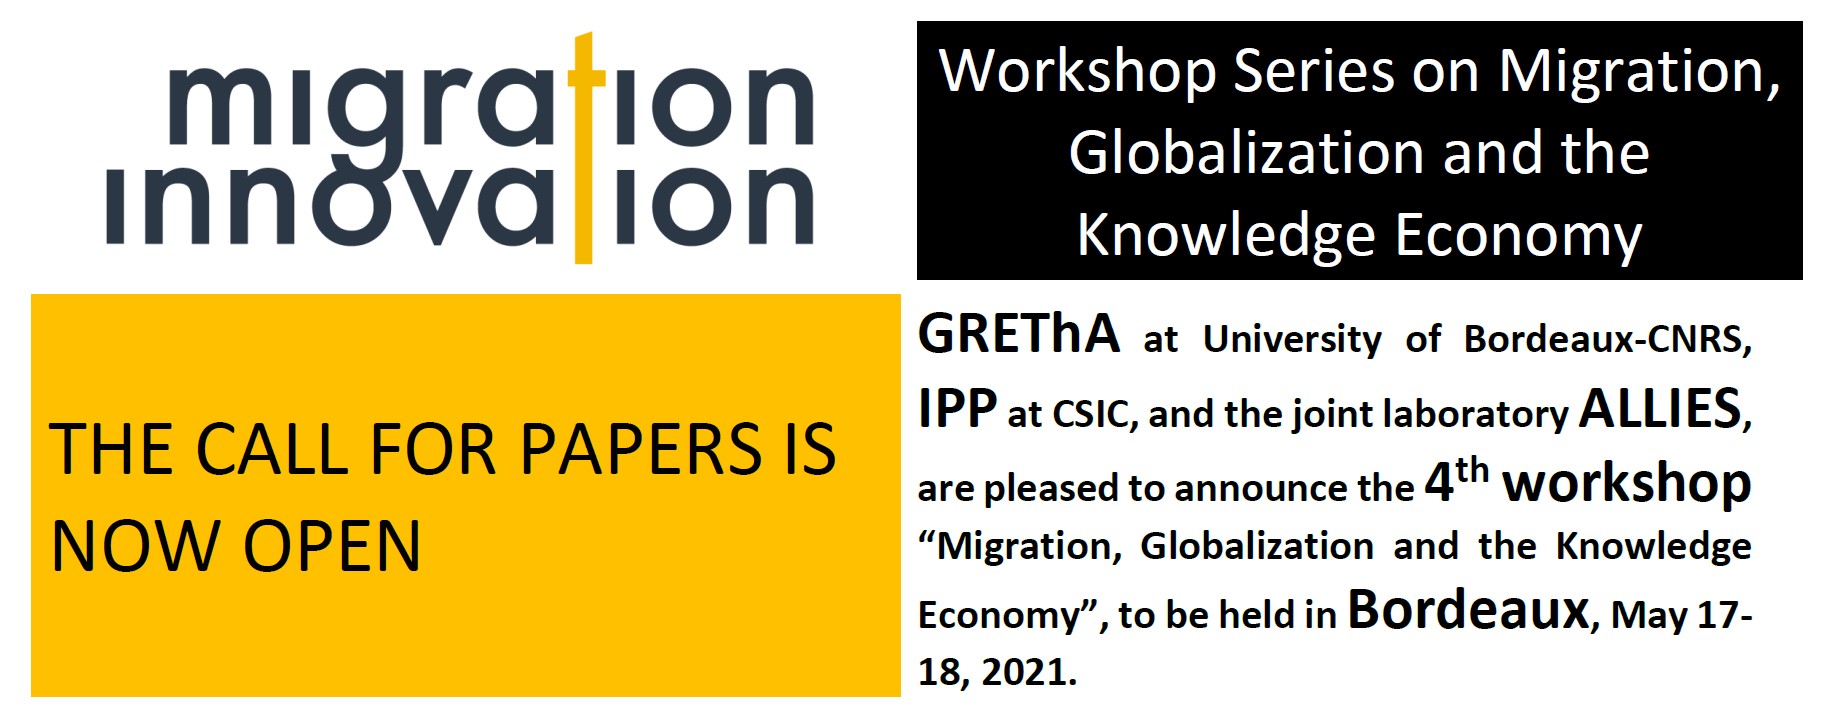 CfP: Workshop on Migration, Globalization and the Knowledge Economy – 4th edition!